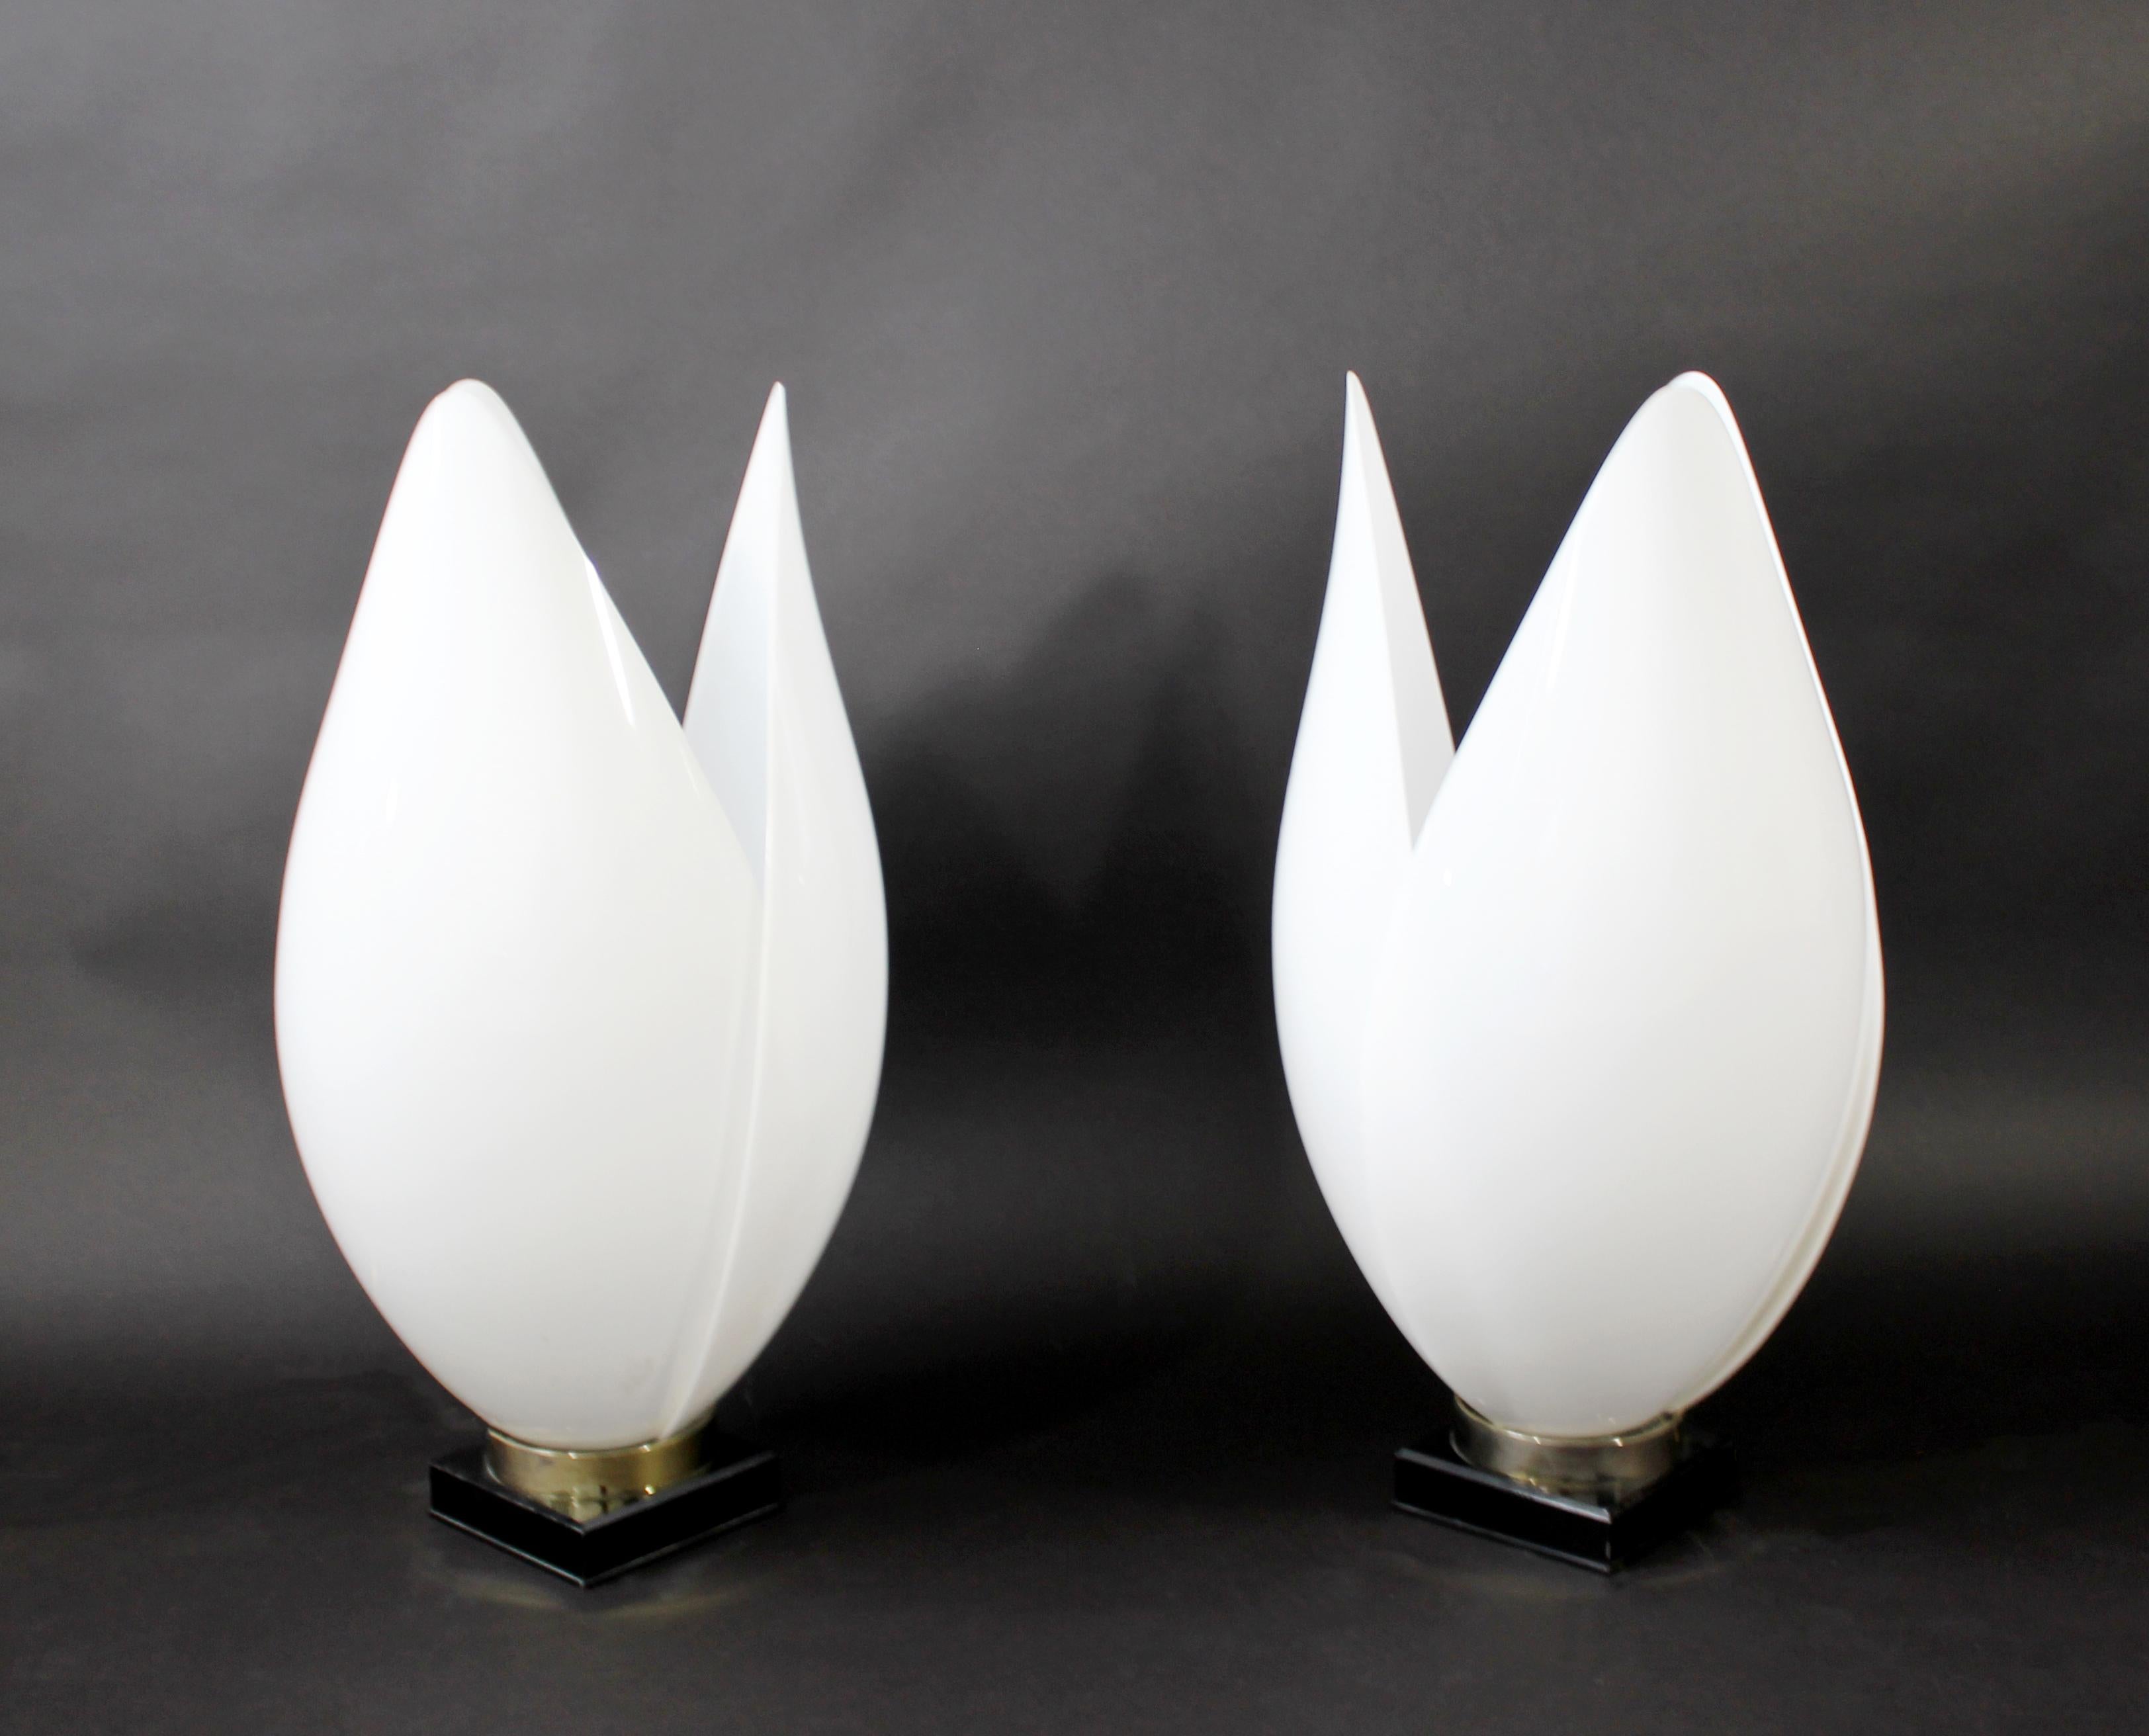 Canadian Contemporary Modern Pair of White Rougier Table Lamps 1980s Acrylic Flower Brass